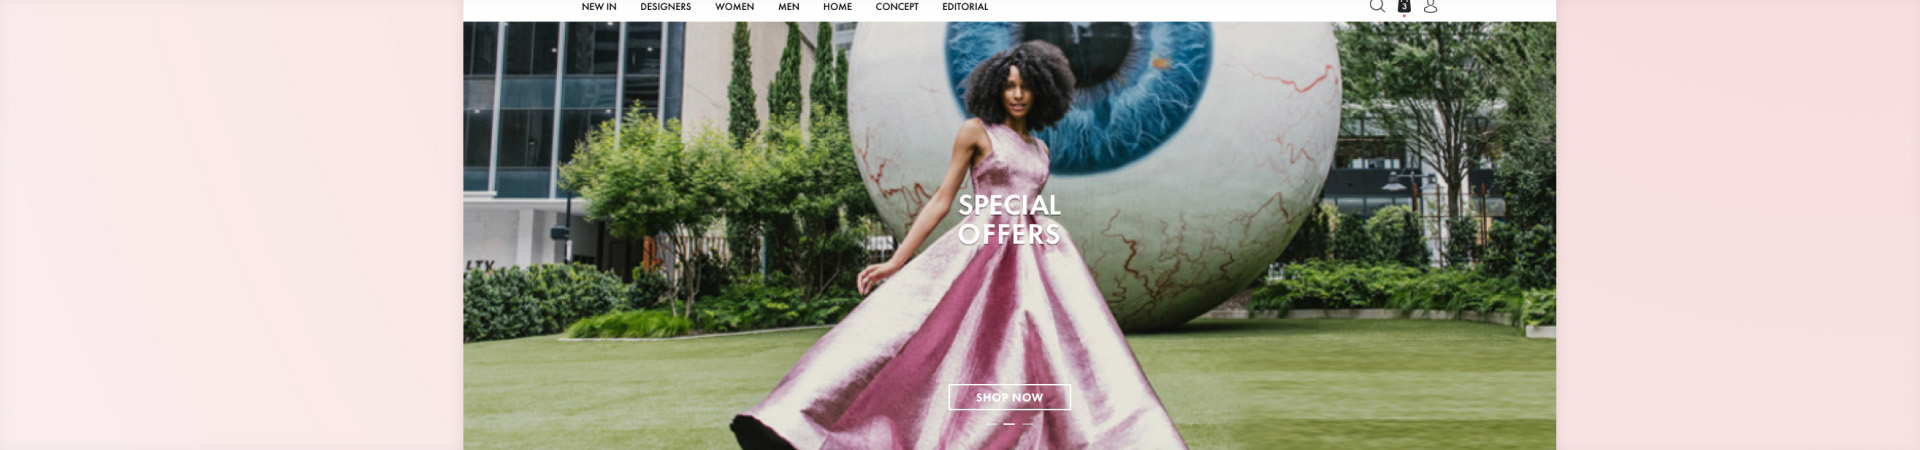 Magento Implementation with Enhanced Product and Content Management for a Fashion Retailer